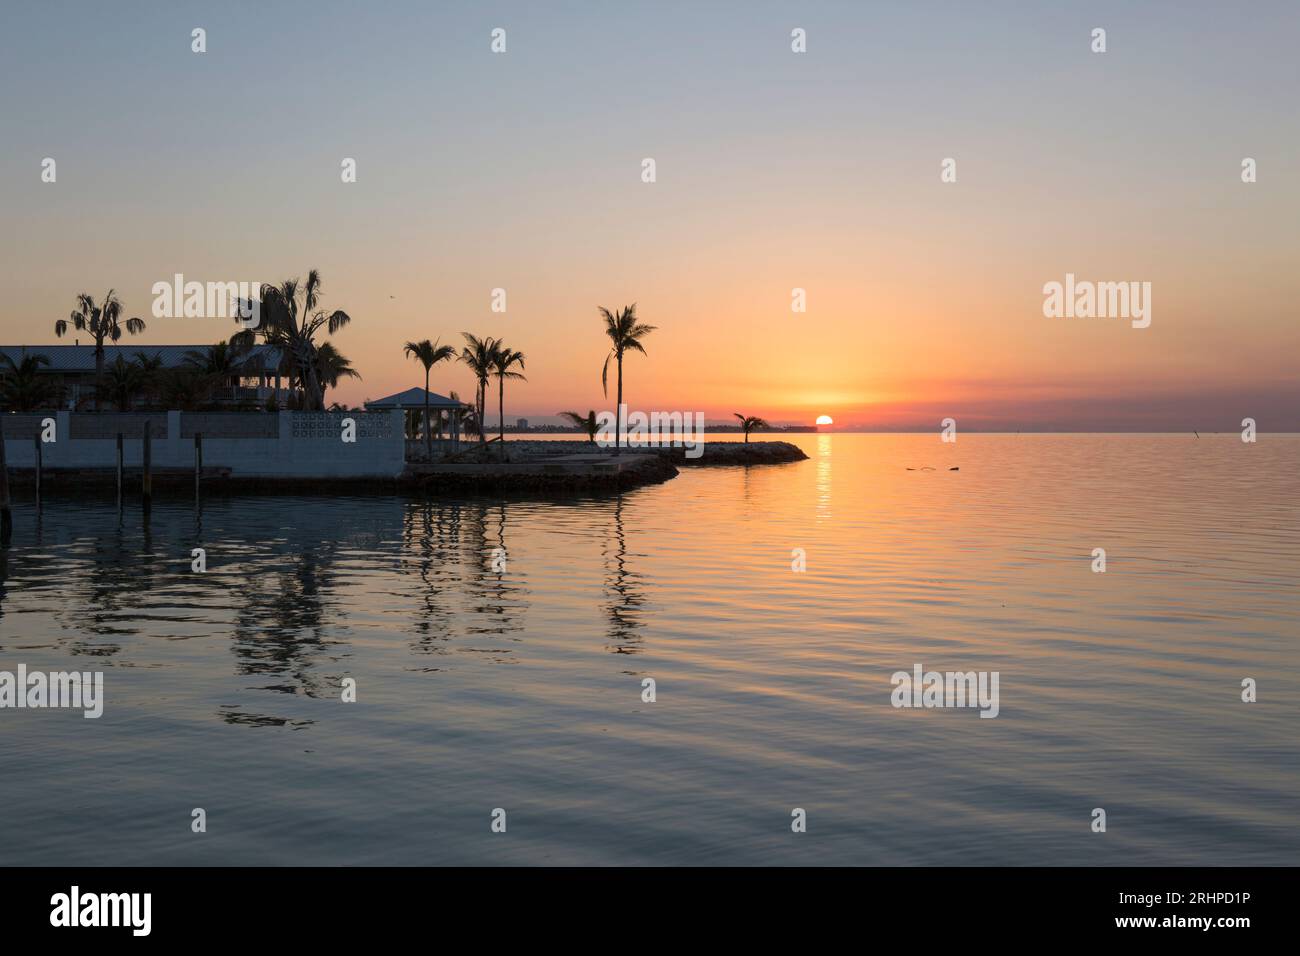 Marathon, Florida, USA. View from Key Vaca across the tranquil waters of the Straits of Florida, sunrise. Stock Photo